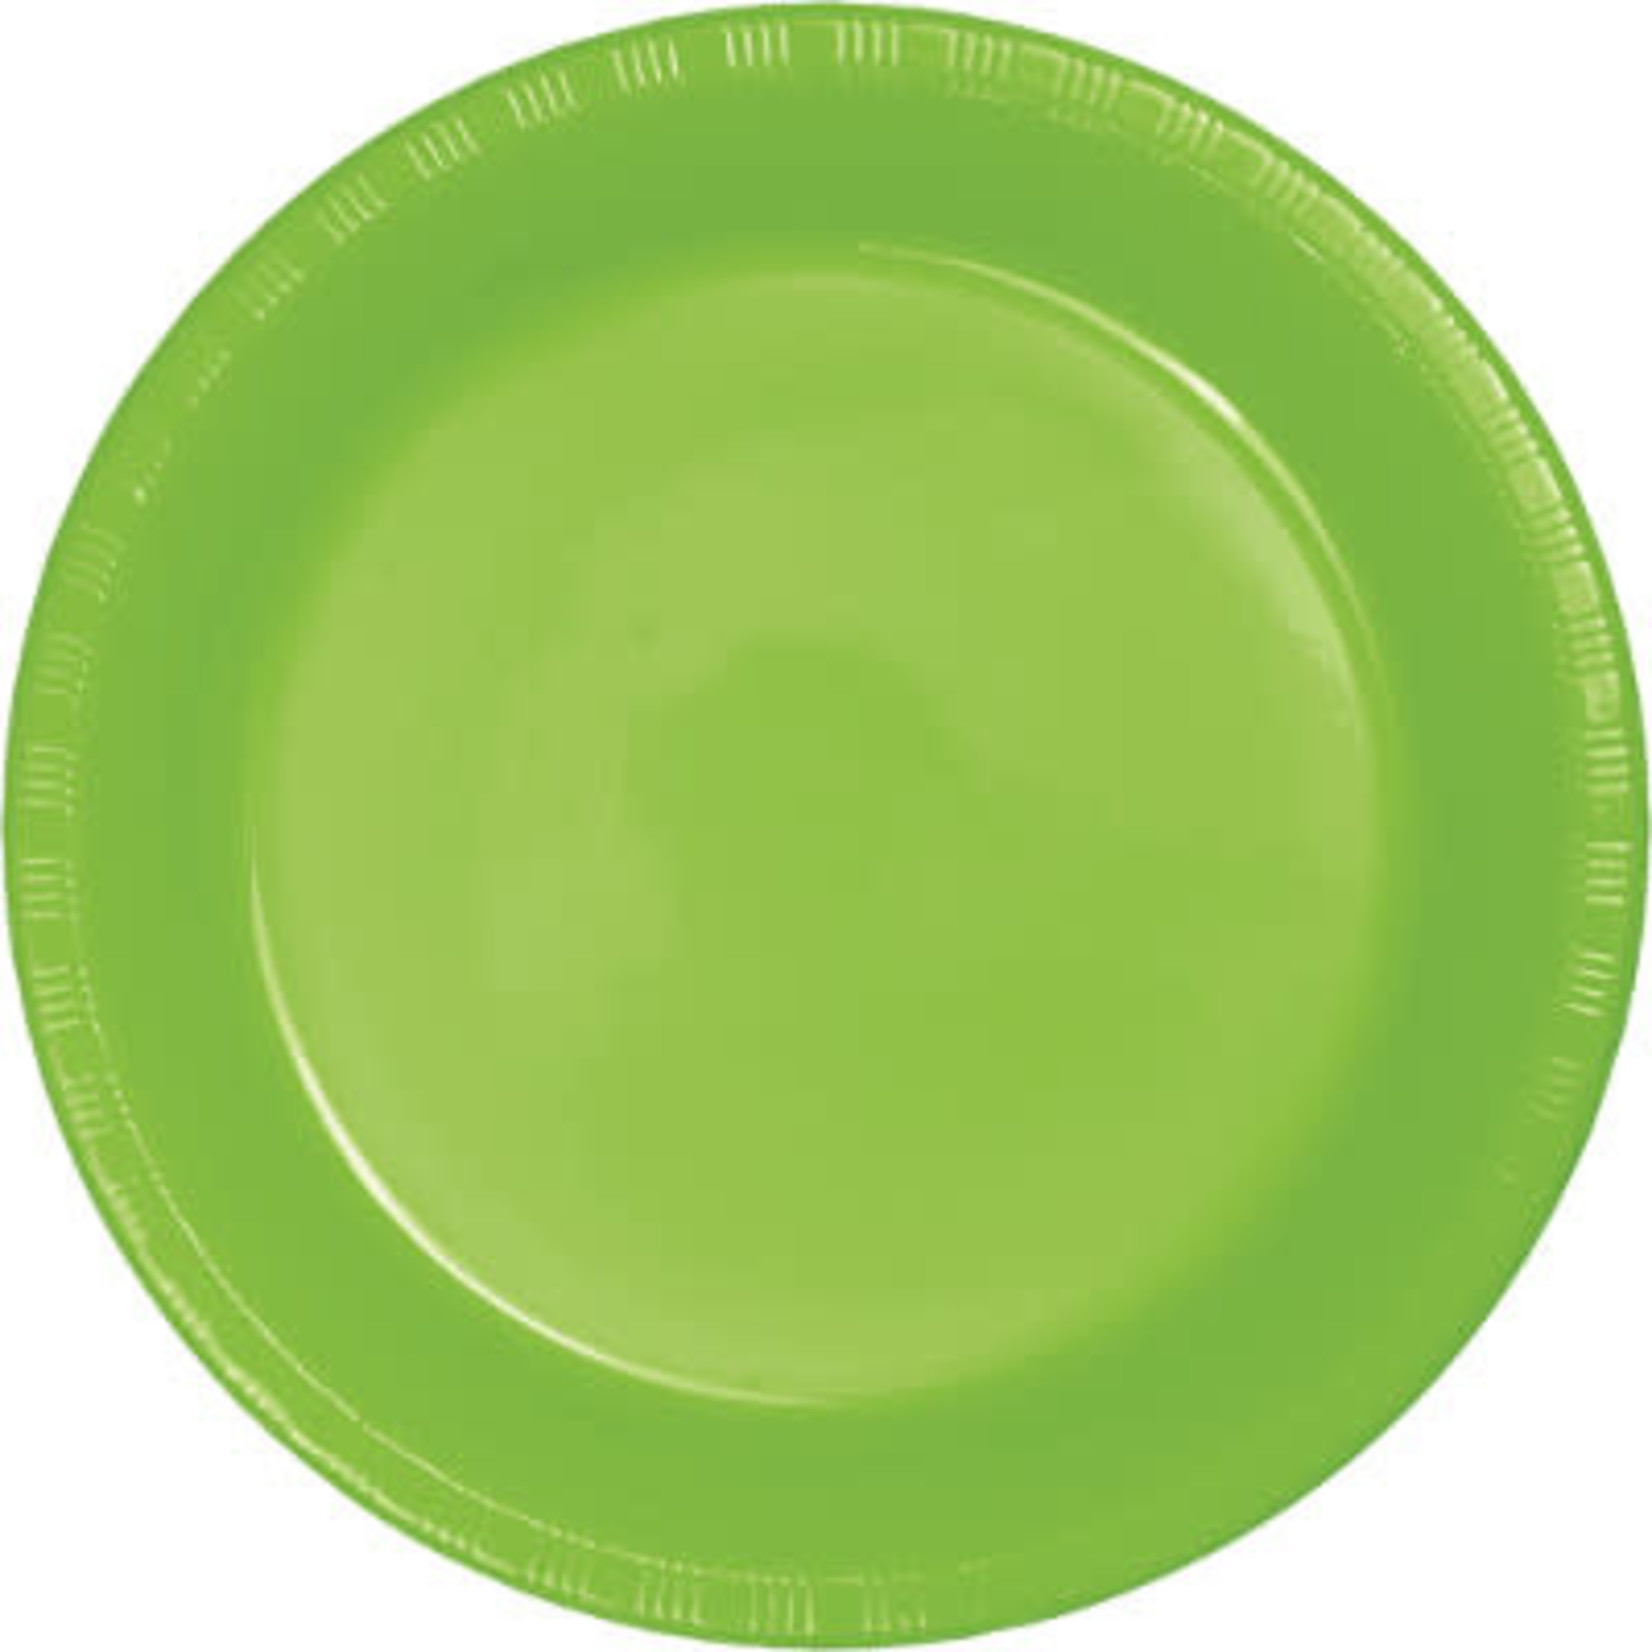 Touch of Color 7" Lime Green Paper Plates - 24ct.